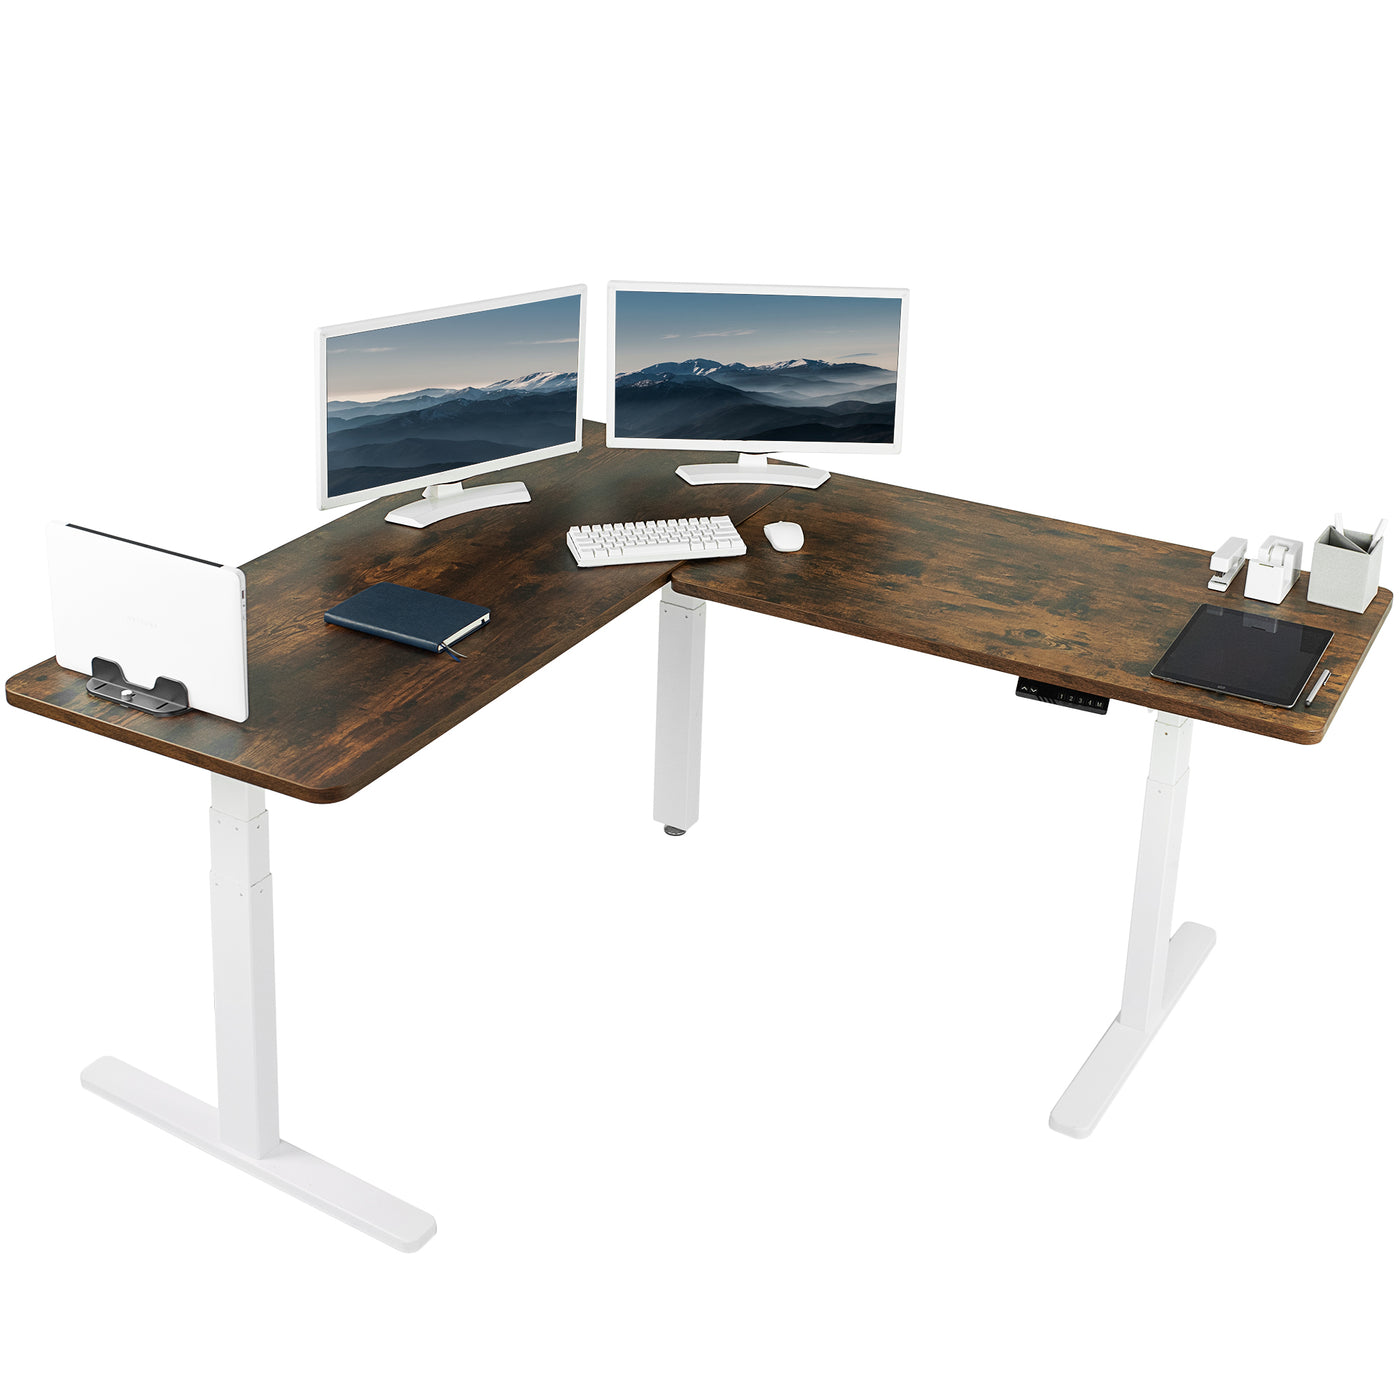 Heavy-duty rustic electric height adjustable corner desk workstation for active sit or stand efficient workspace.